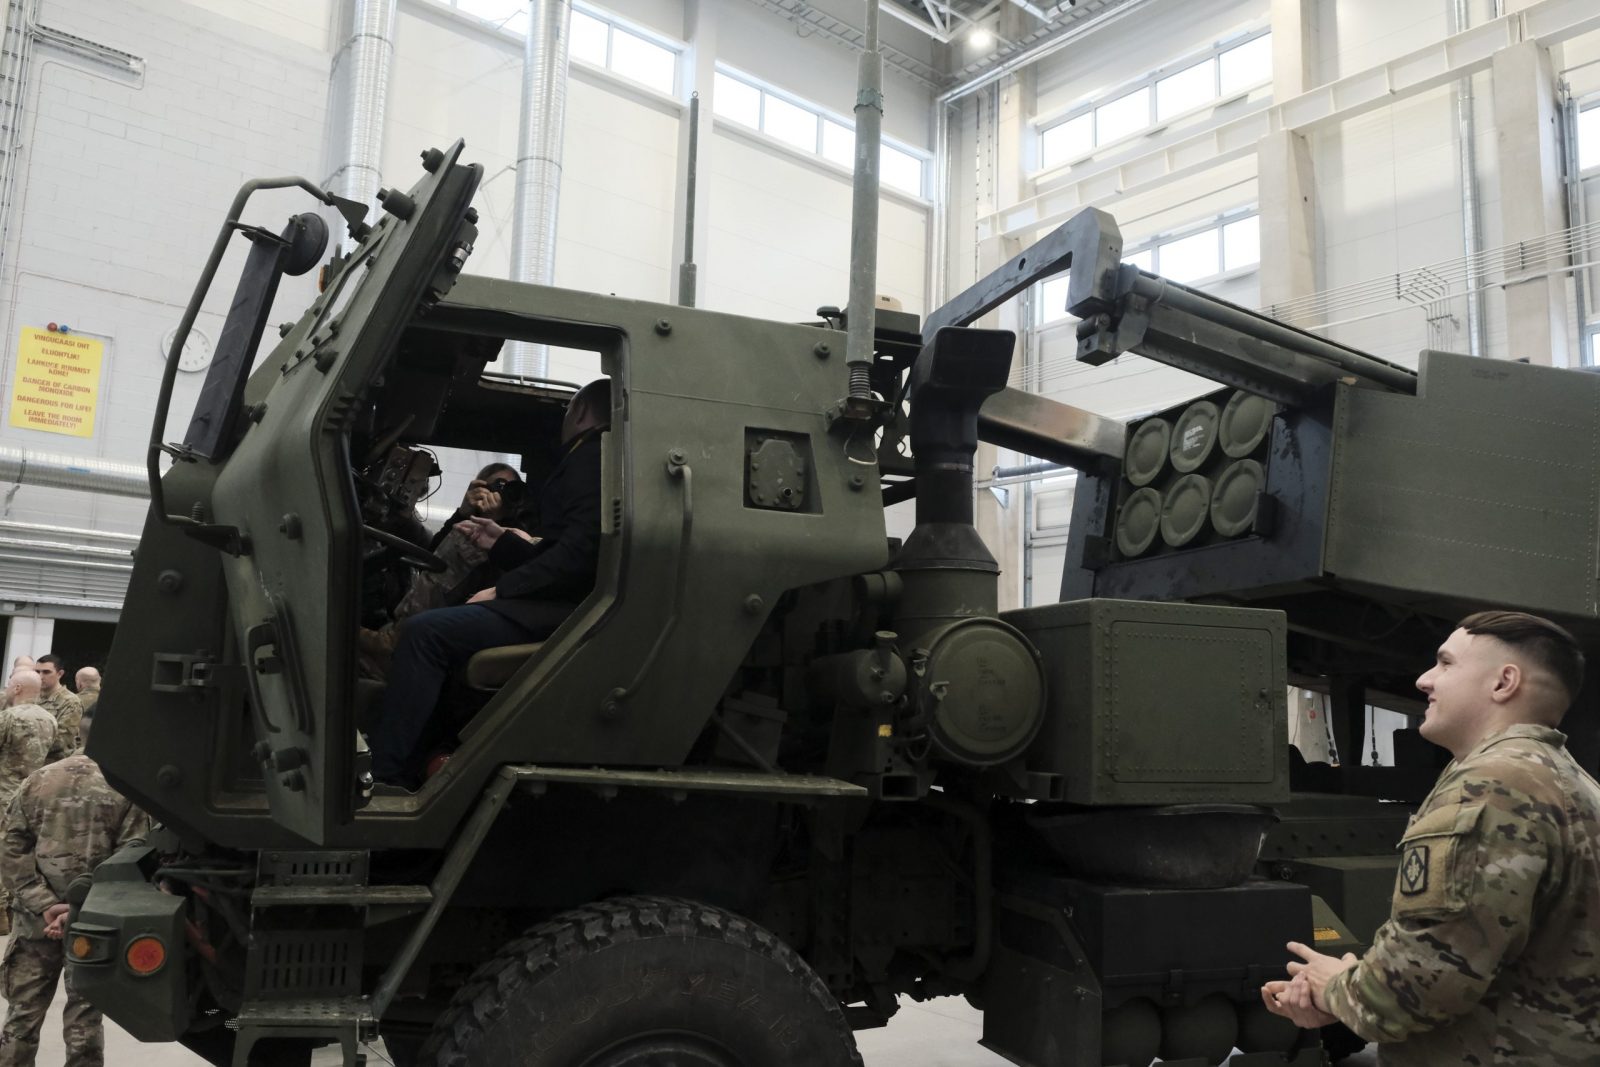 epa10391963 US Army multiple rocket launcher HIMARS is on display during the media day at the Tapa military base, Estonia, 06 January 2023. During the event, visitors had the opportunity to get acquainted with the US Army multiple rocket launcher HIMARS, which will enter the Estonian defense force's arsenal in 2024.  EPA/VALDA KALNINA